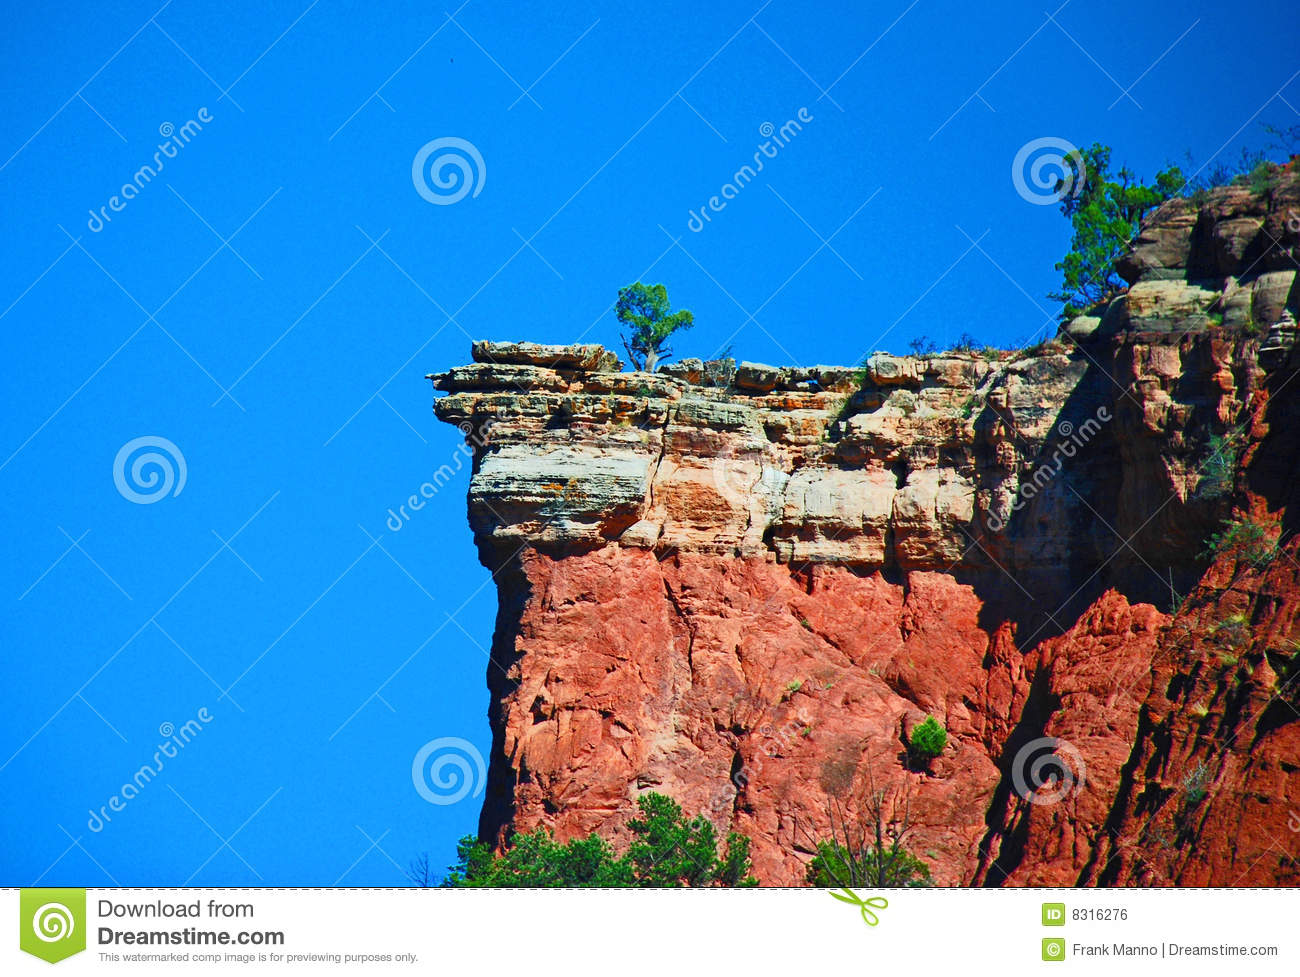 Royalty Free Stock Image  Out On A Ledge   A Rock Ledge